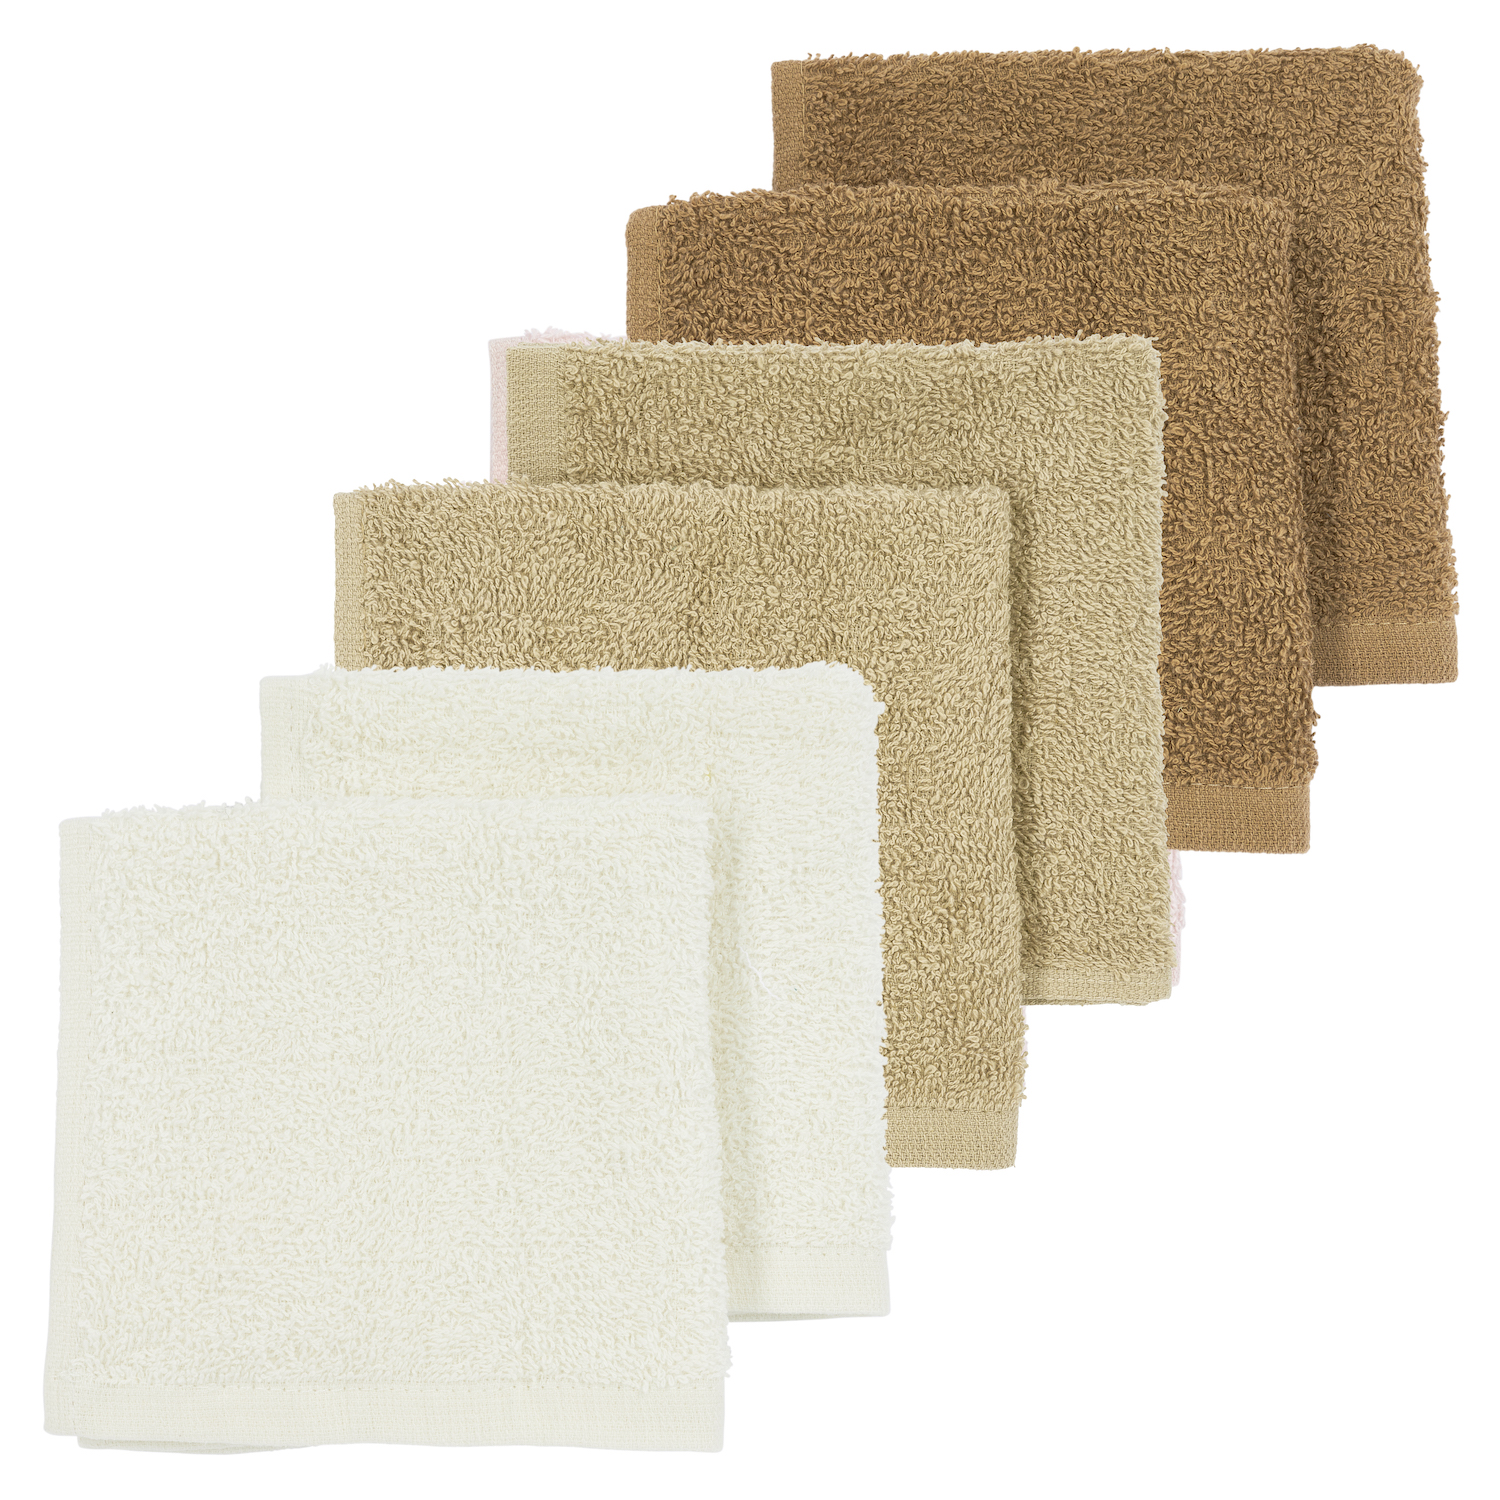 Spucktücher Frottee 6-pack - Offwhite/Sand/Toffee - 30x30cm